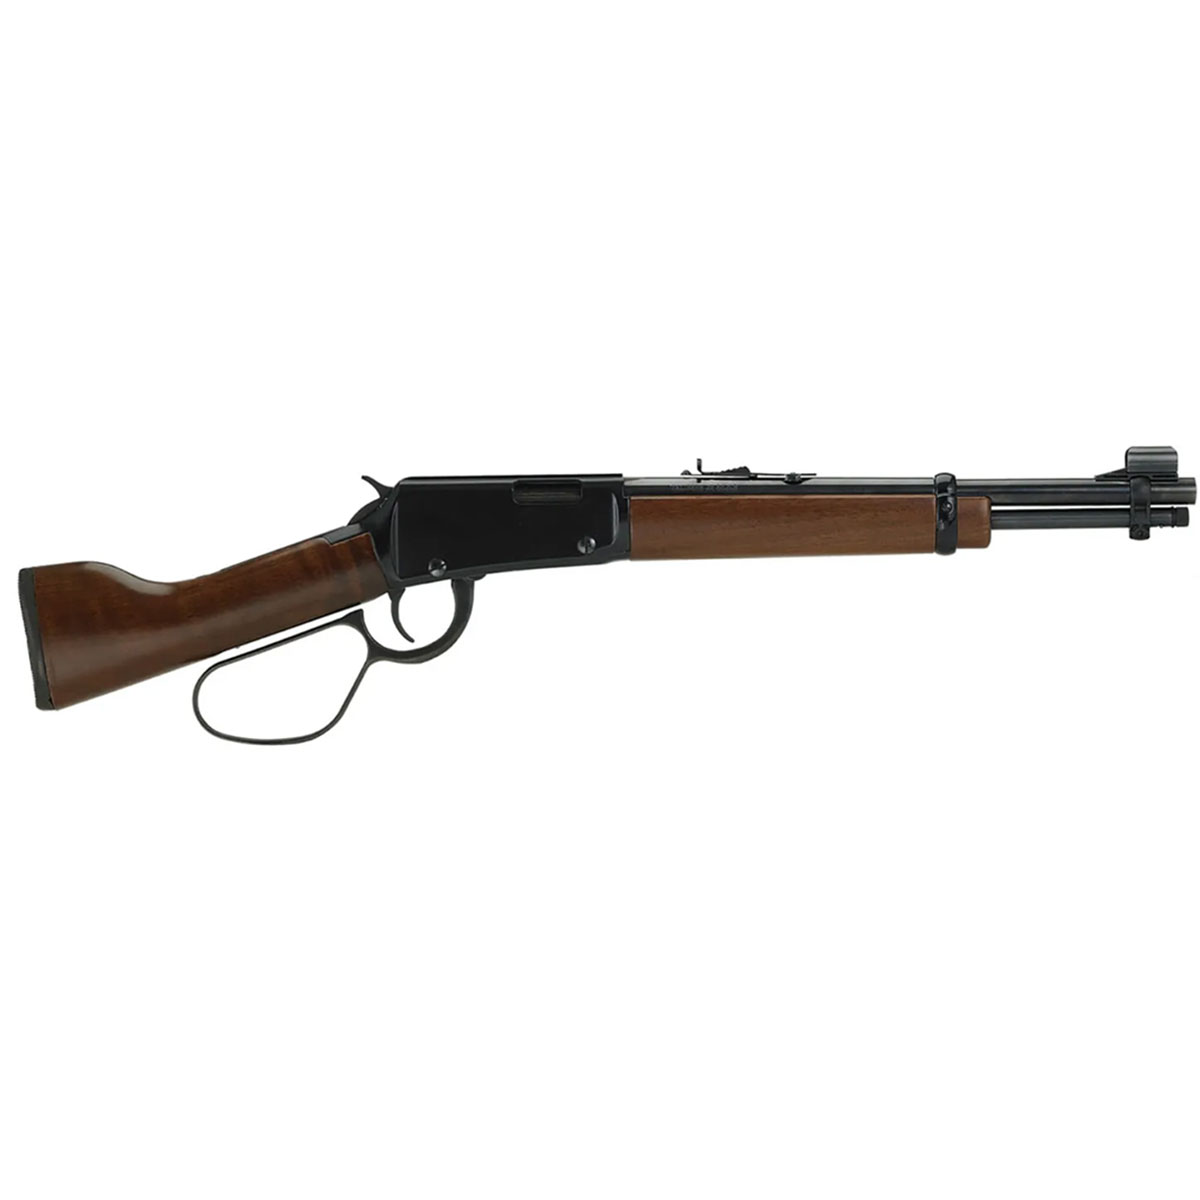 HENRY REPEATING ARMS - MARE'S LEG .22 LONG RIFLE LEVER ACTION RIFLE